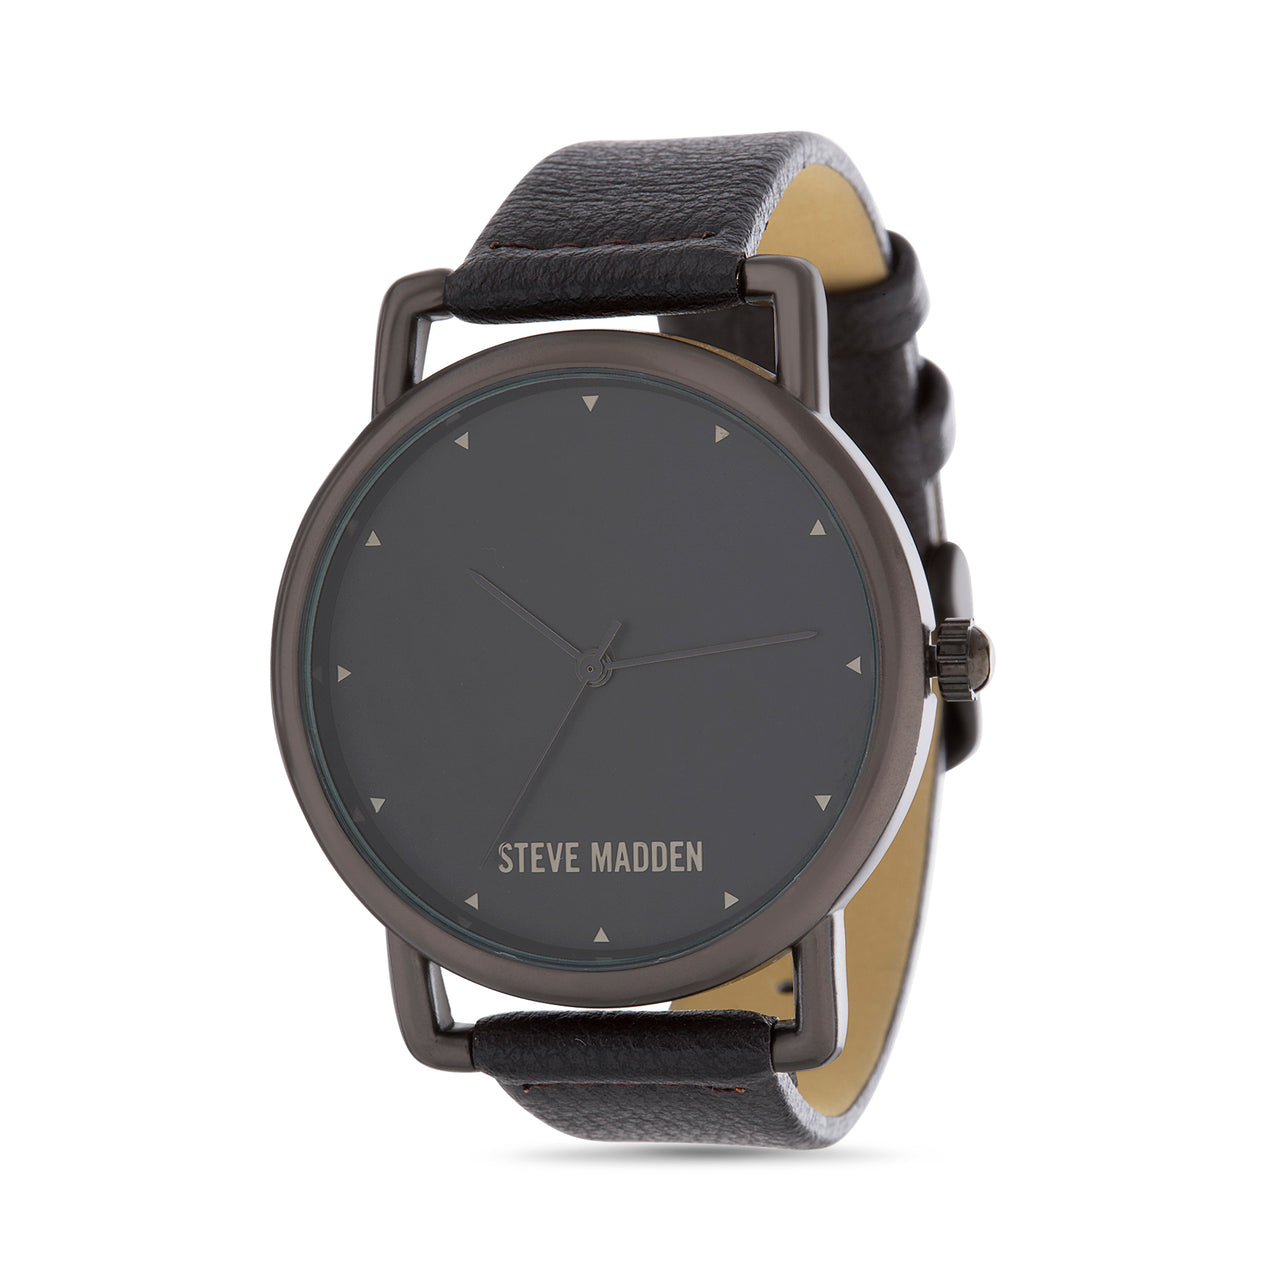 Steve Madden Round Face Leather Strap Watch